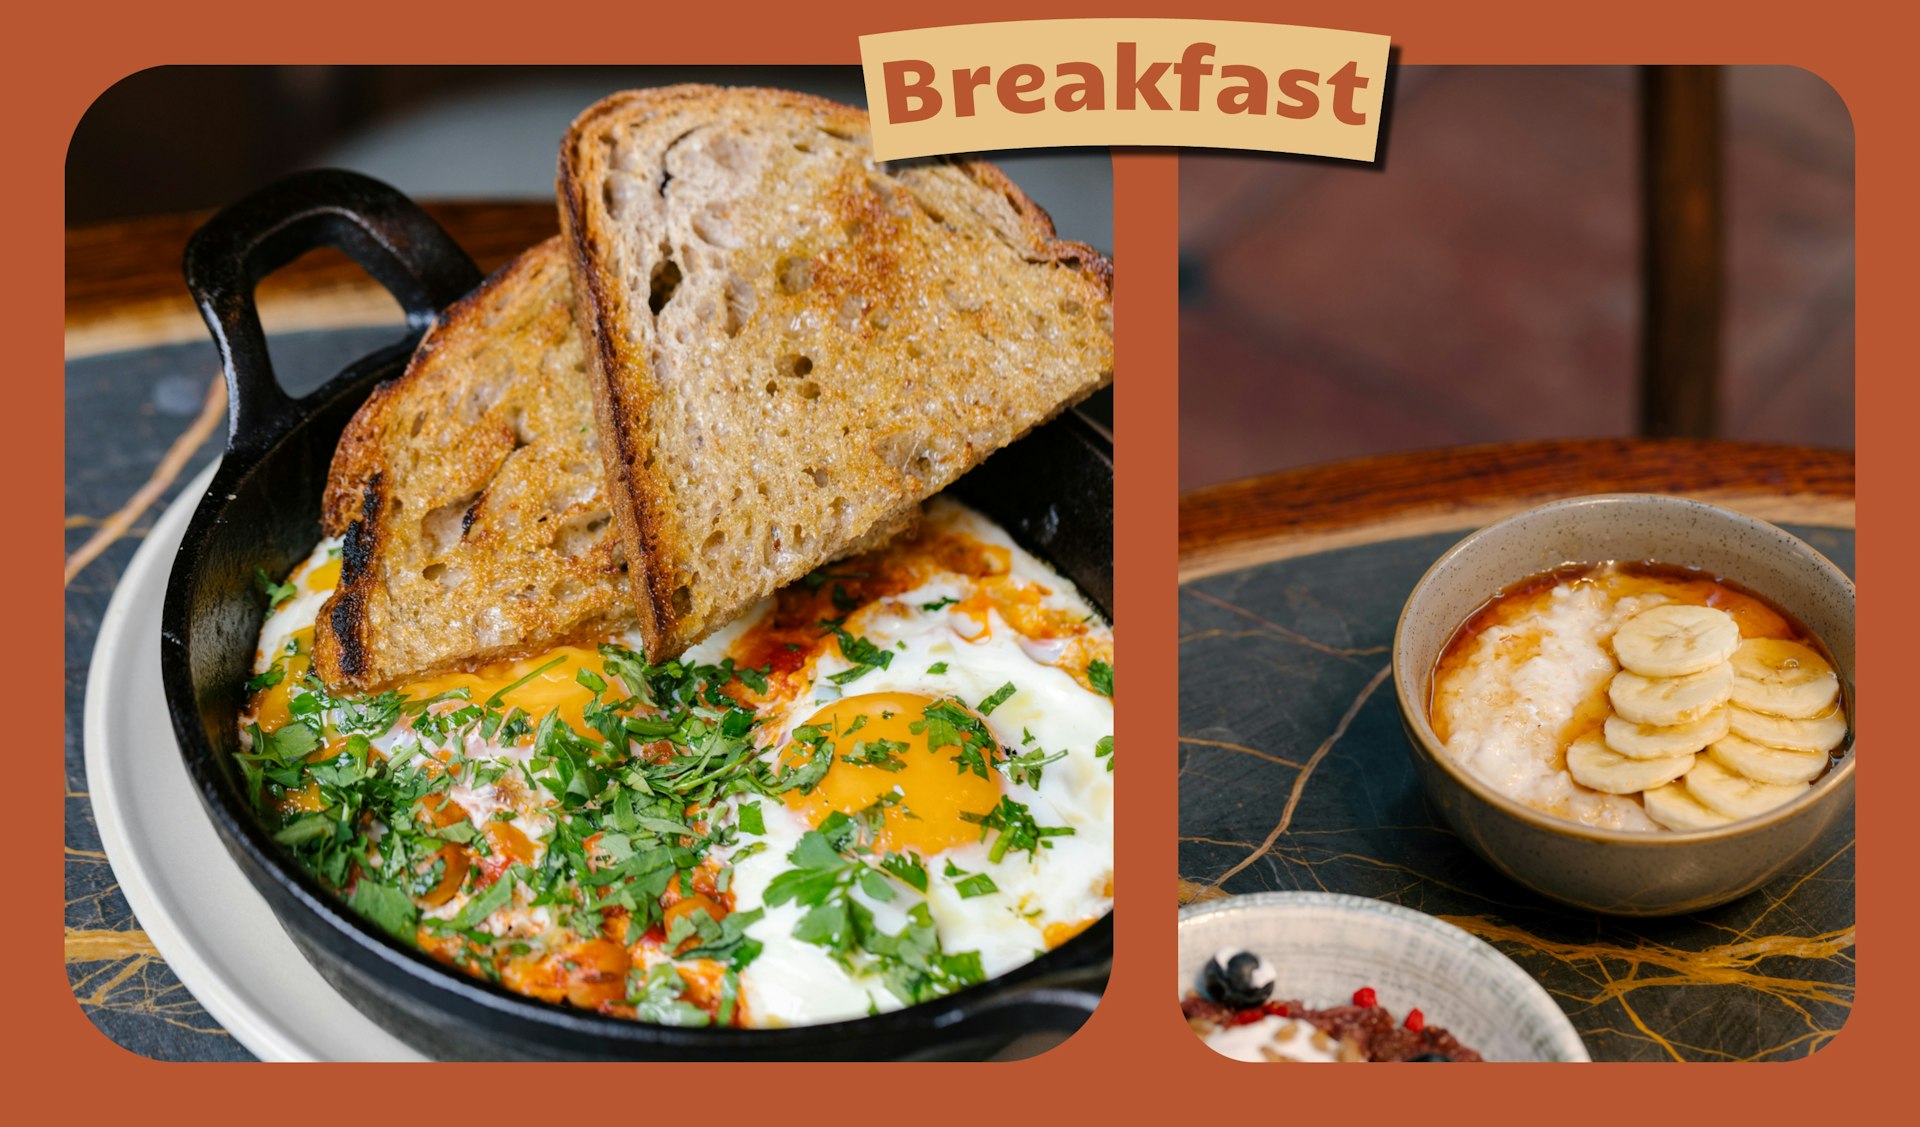 A collage image. L: close-up of fried eggs, toast and beans. R: Porridge